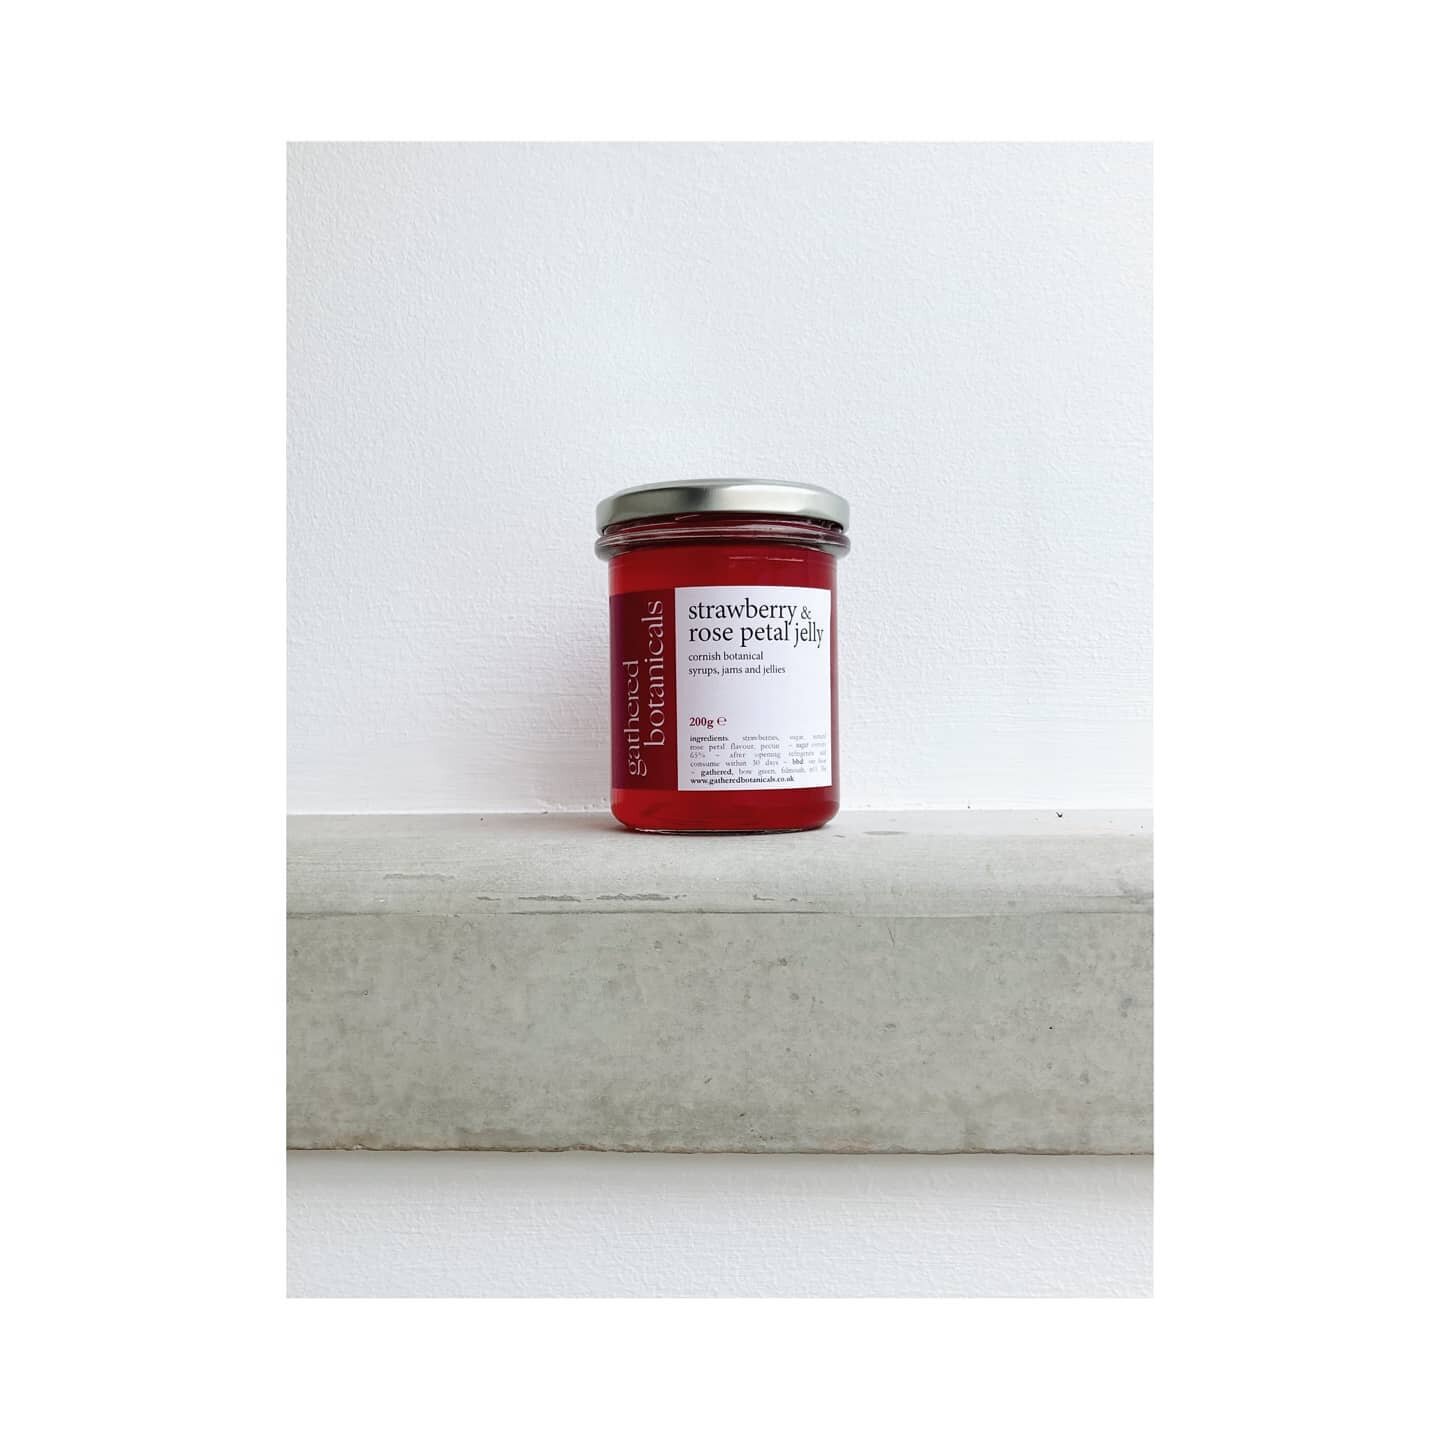 SUMMER STRAWBERRIES ~ our strawberry &amp; rose petal jelly and jam is now online. utterly heavenly eaten with a scone teamed with a big dollop of @trewithen_dairy clotted cream. 🍓🌹❤️